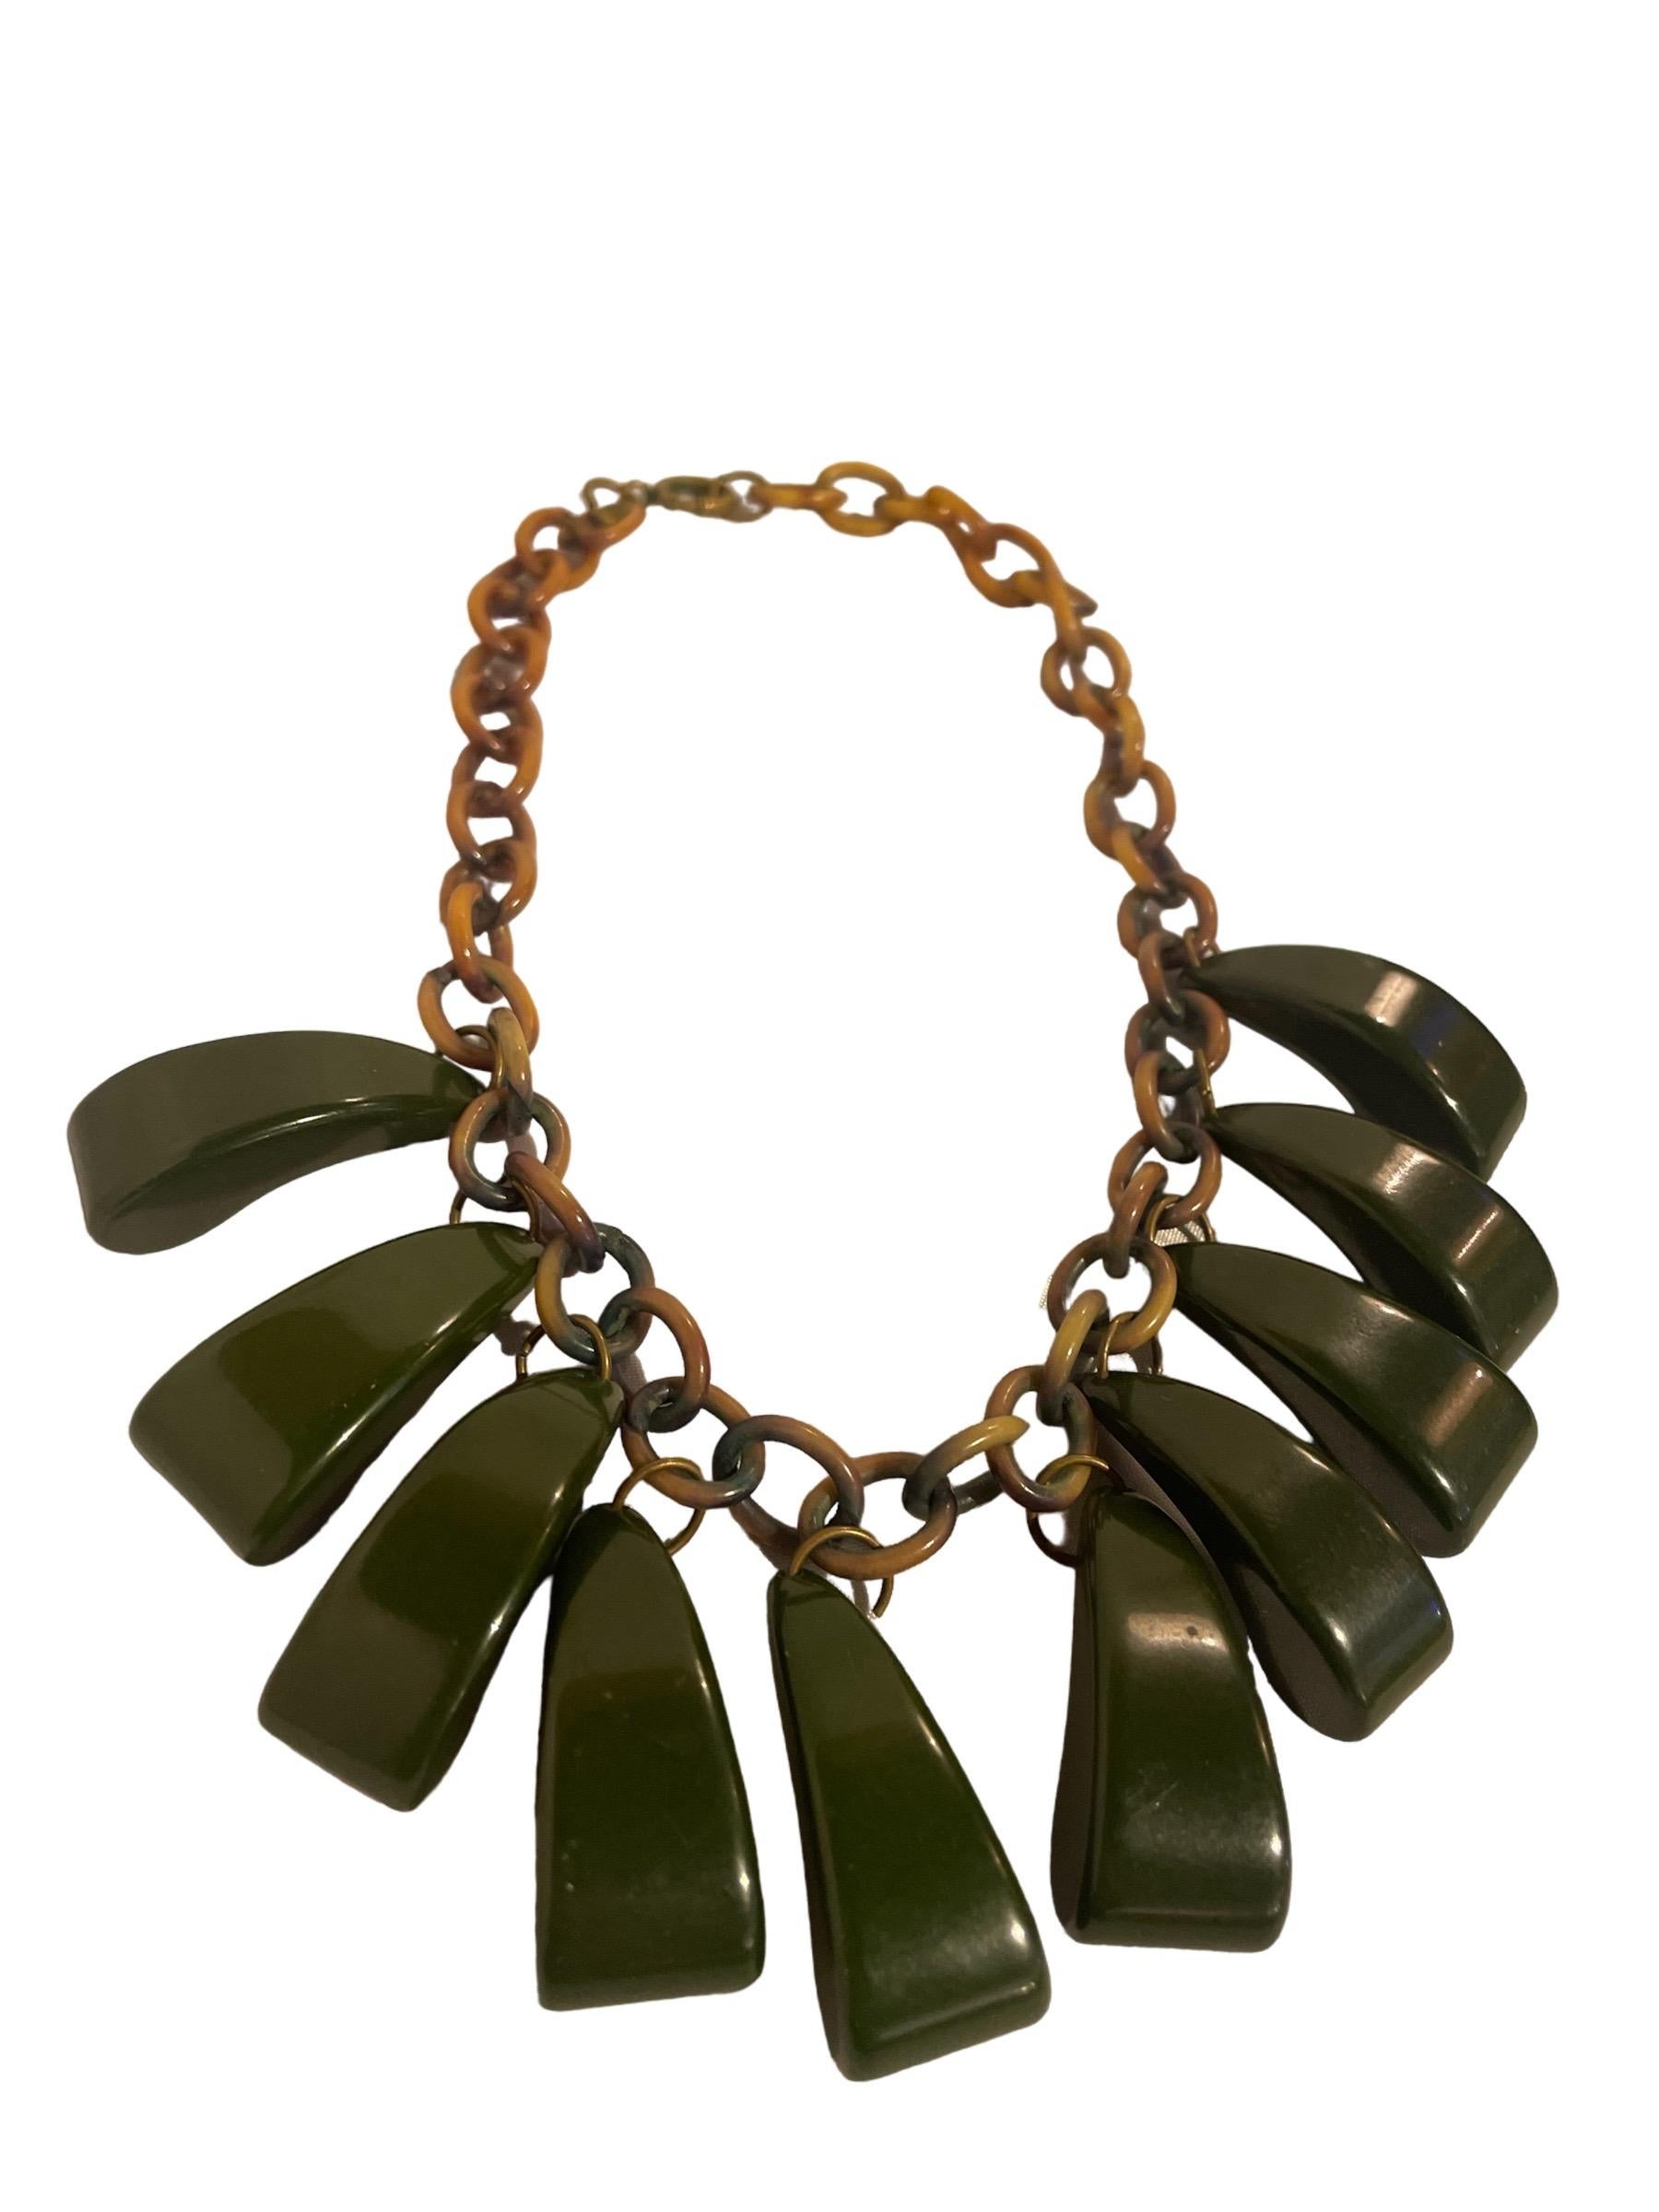 1940s Avocado Green Bakelite Charm Necklace

Beautiful vintage piece in excellent condition! Chunky green teardrop bakelite charms on a celluloid chain.

Length: 16